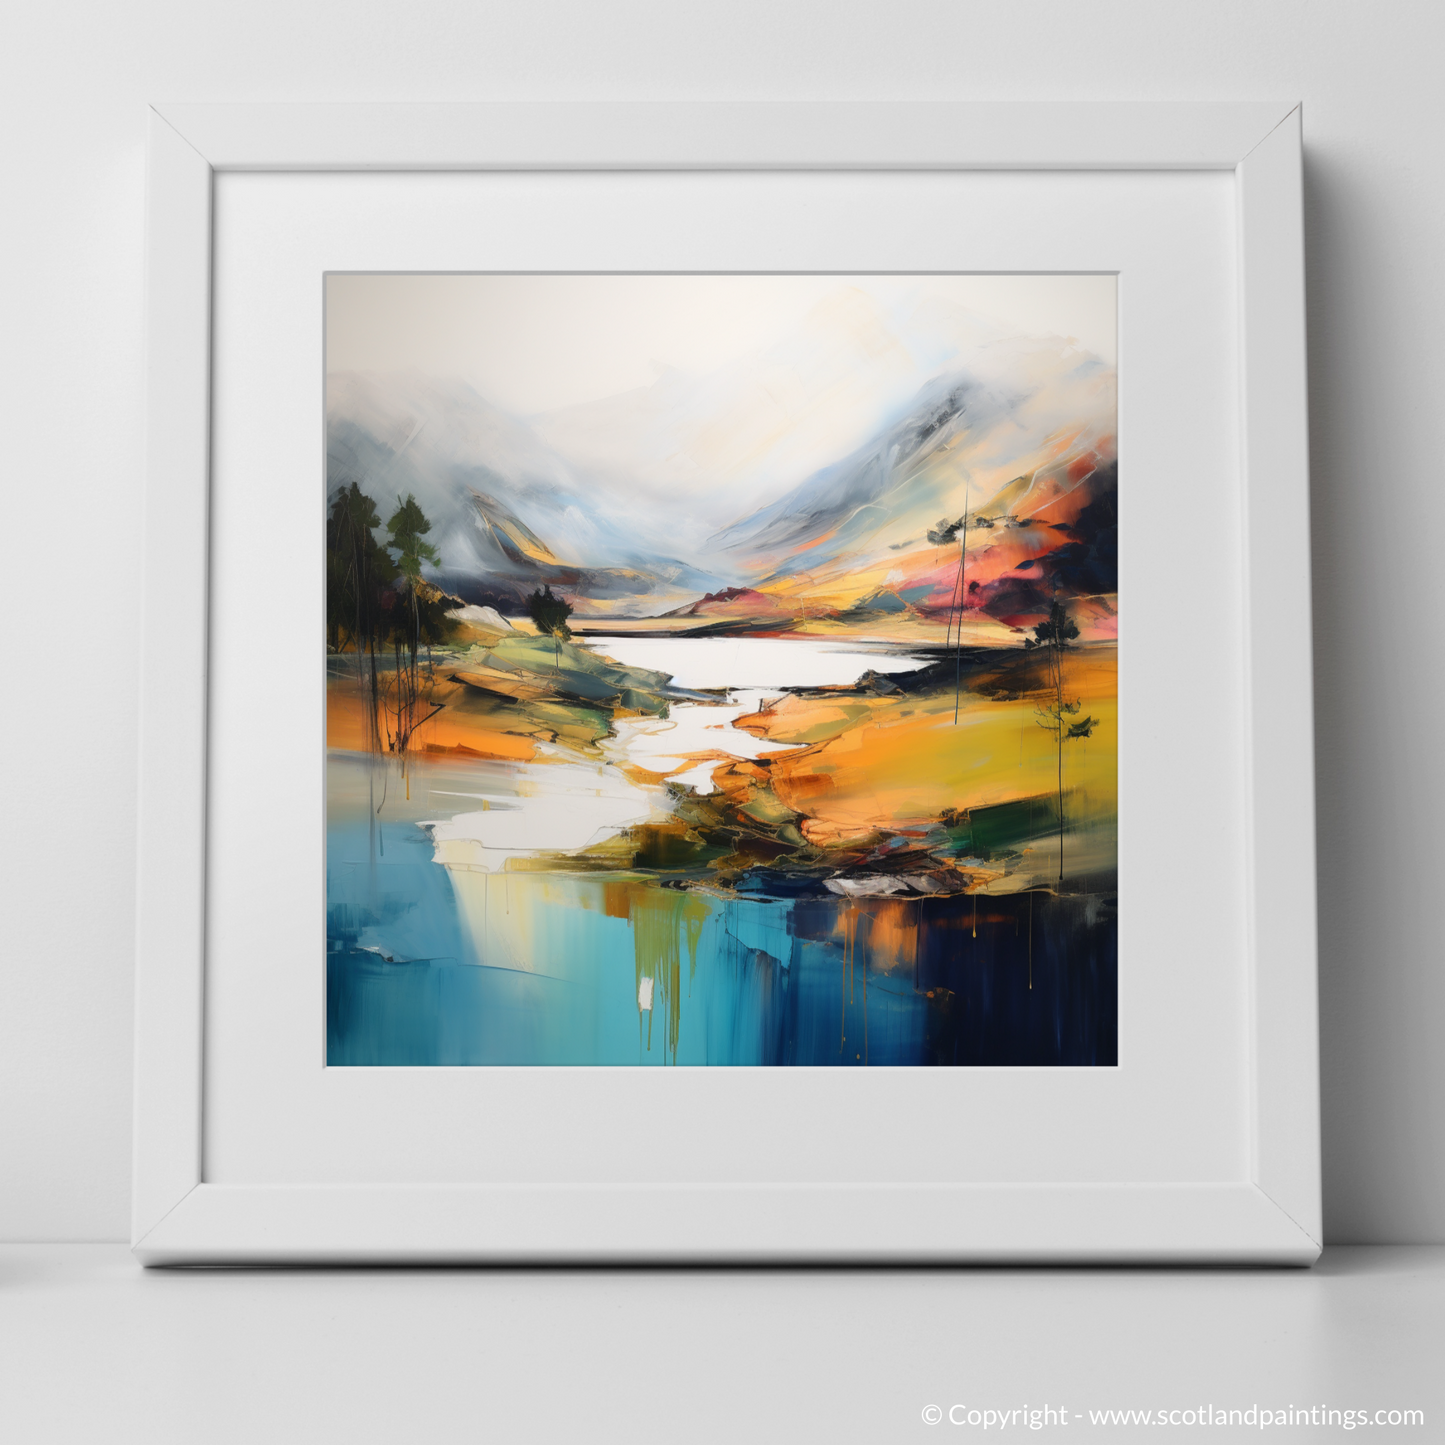 Highland Essence: An Abstract Ode to Glen Affric